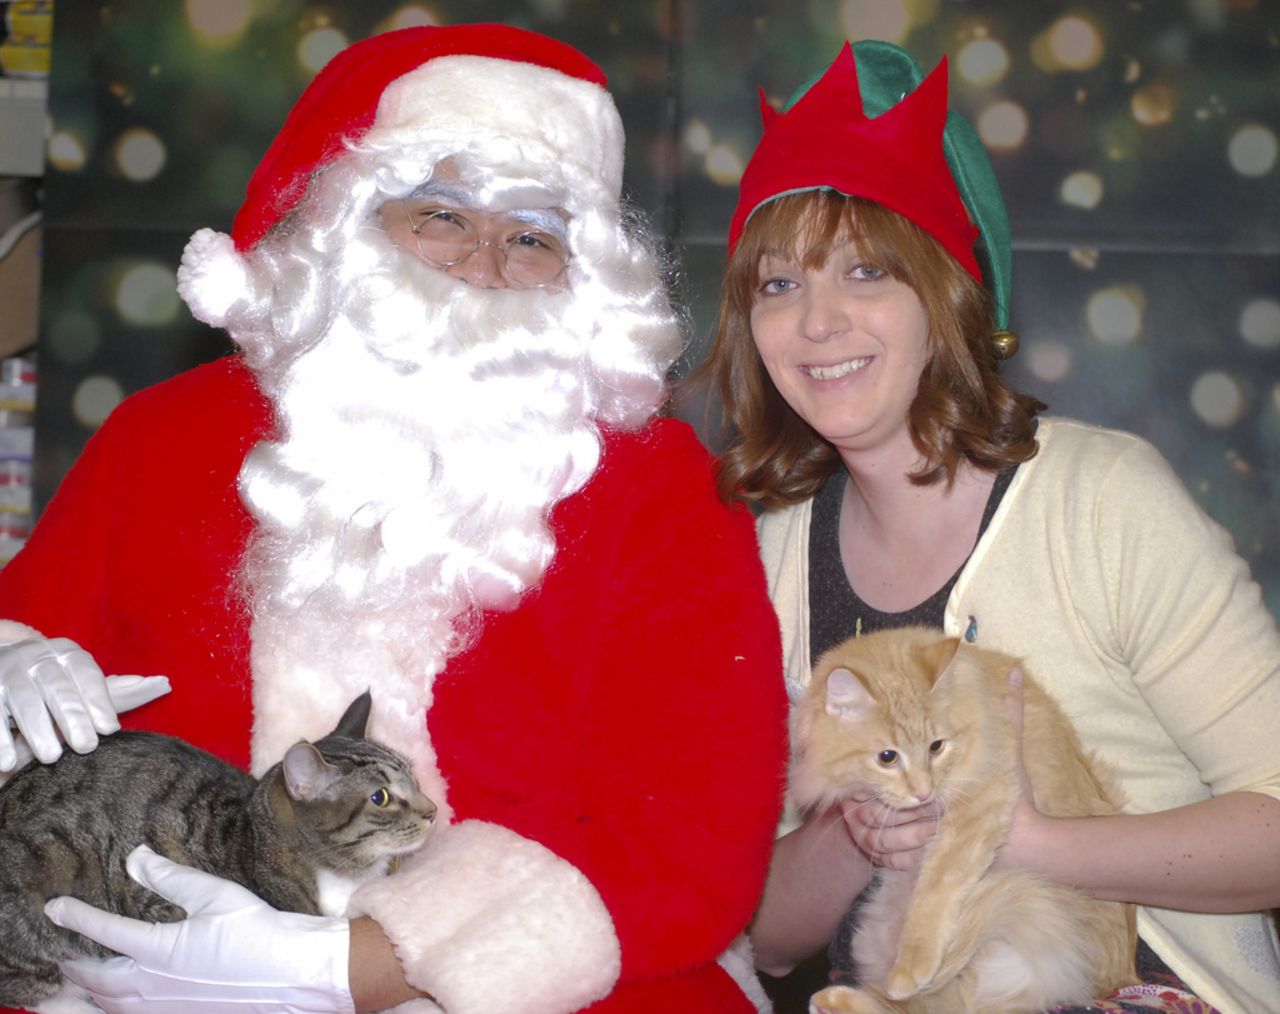 Carissa Rhea, right, poses with Santa and her cats Wall-E and Eve during the Furkids charity event in 2010.